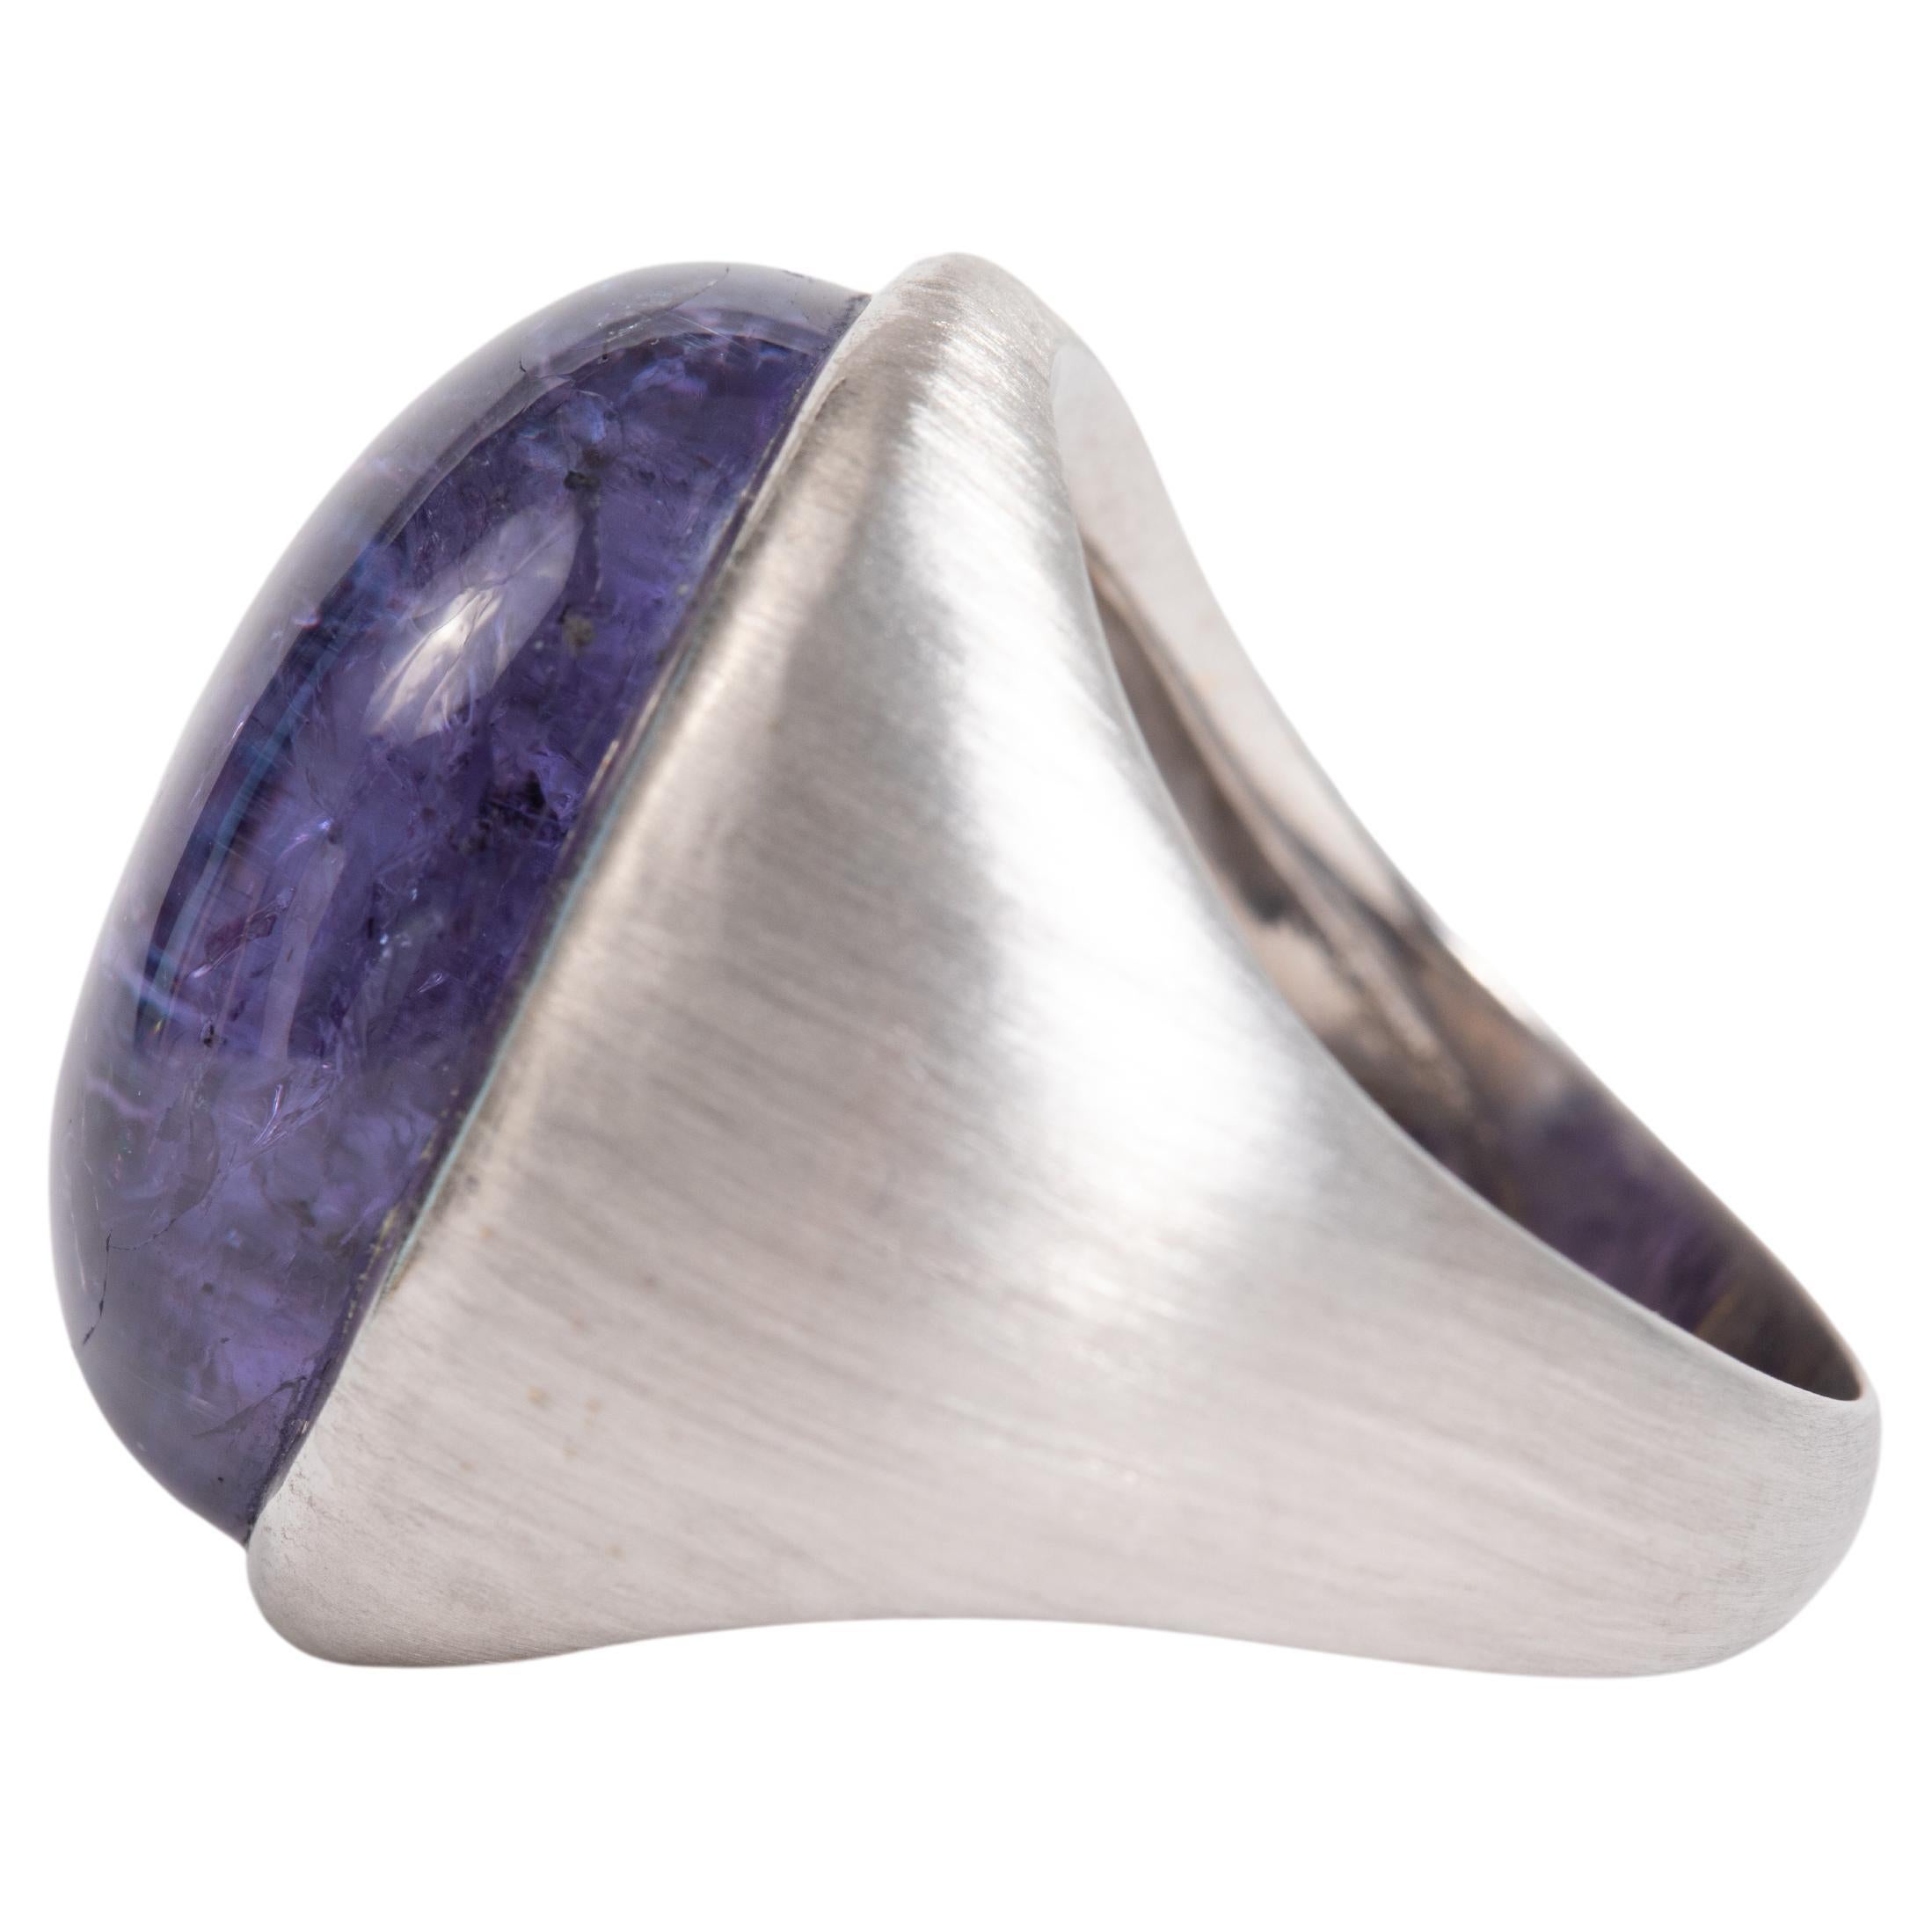 18 K White Gold Brushed Ring with a Gorgeous Tanzanite Cabochon 36.97 Ct